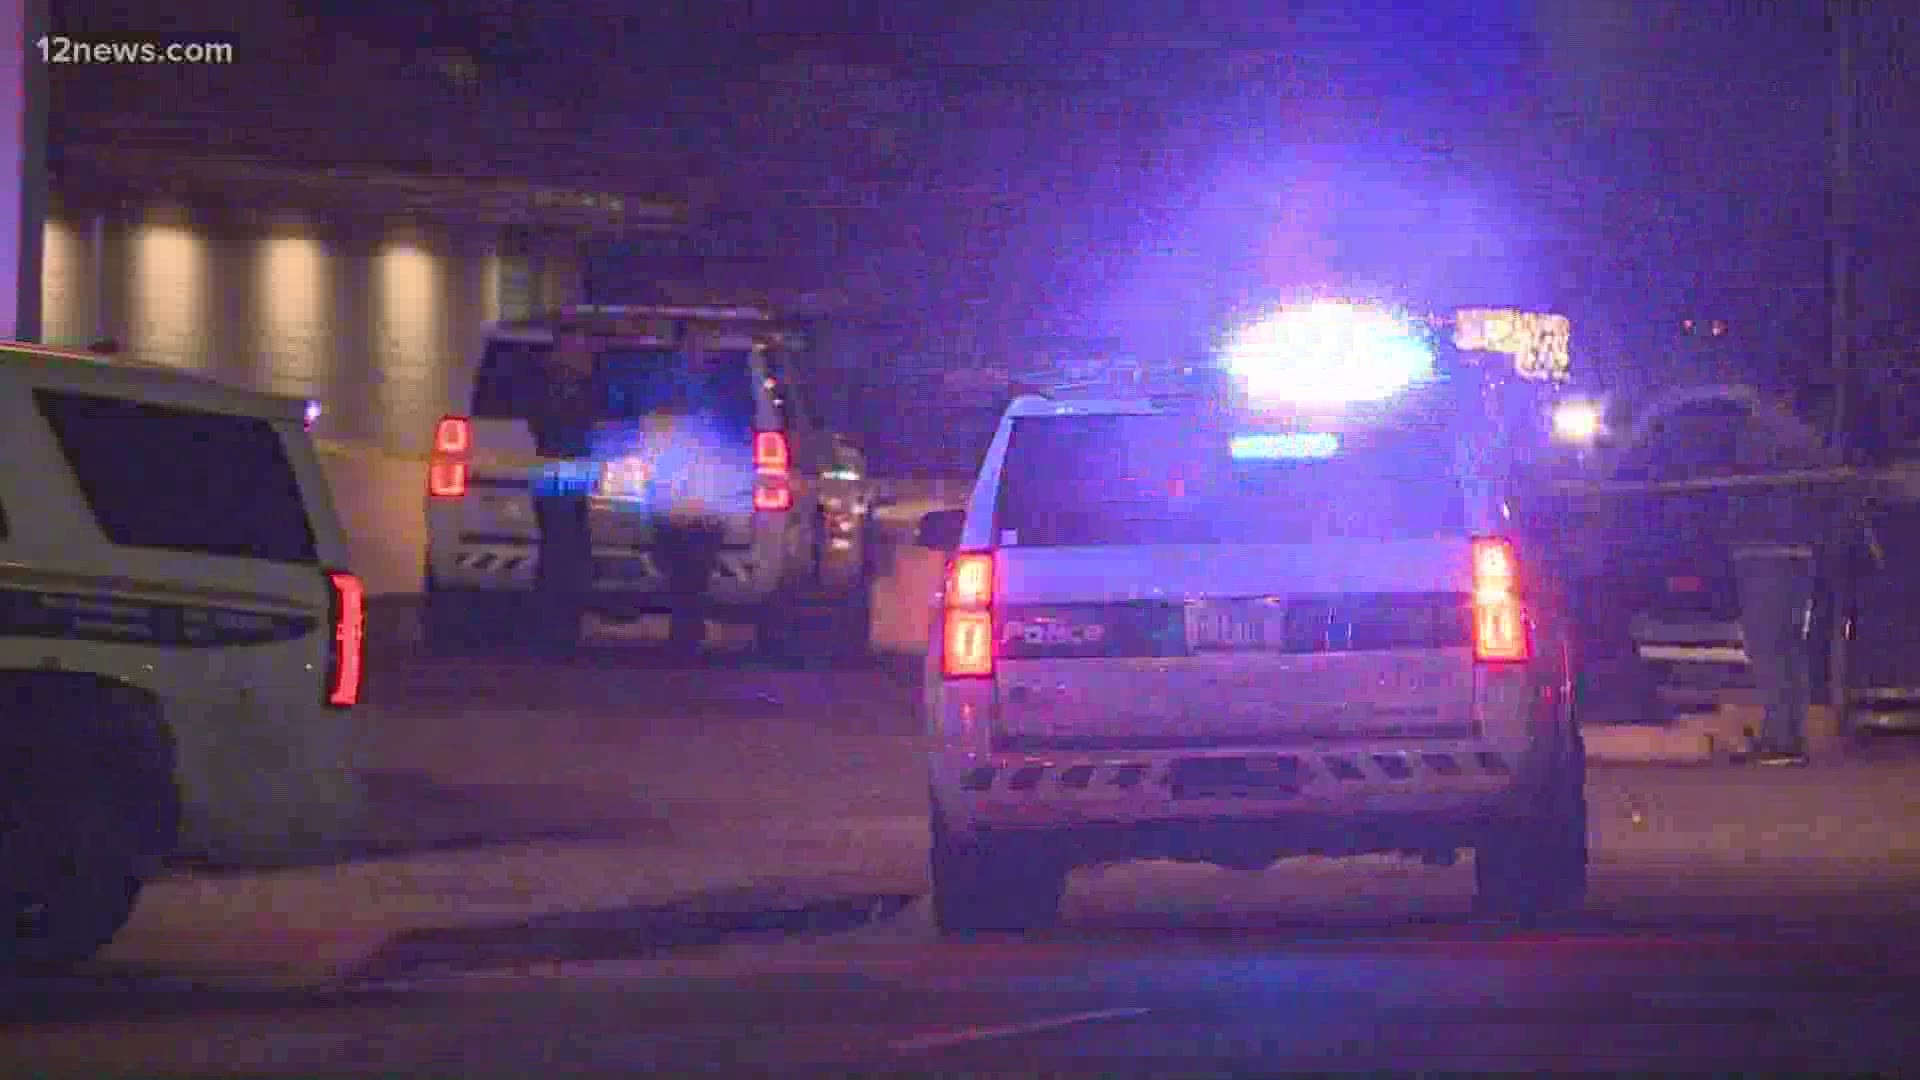 A 47-year-old woman is dead after being shot by Phoenix police overnight, officials said. Rachel McNeill has the latest on the incident.